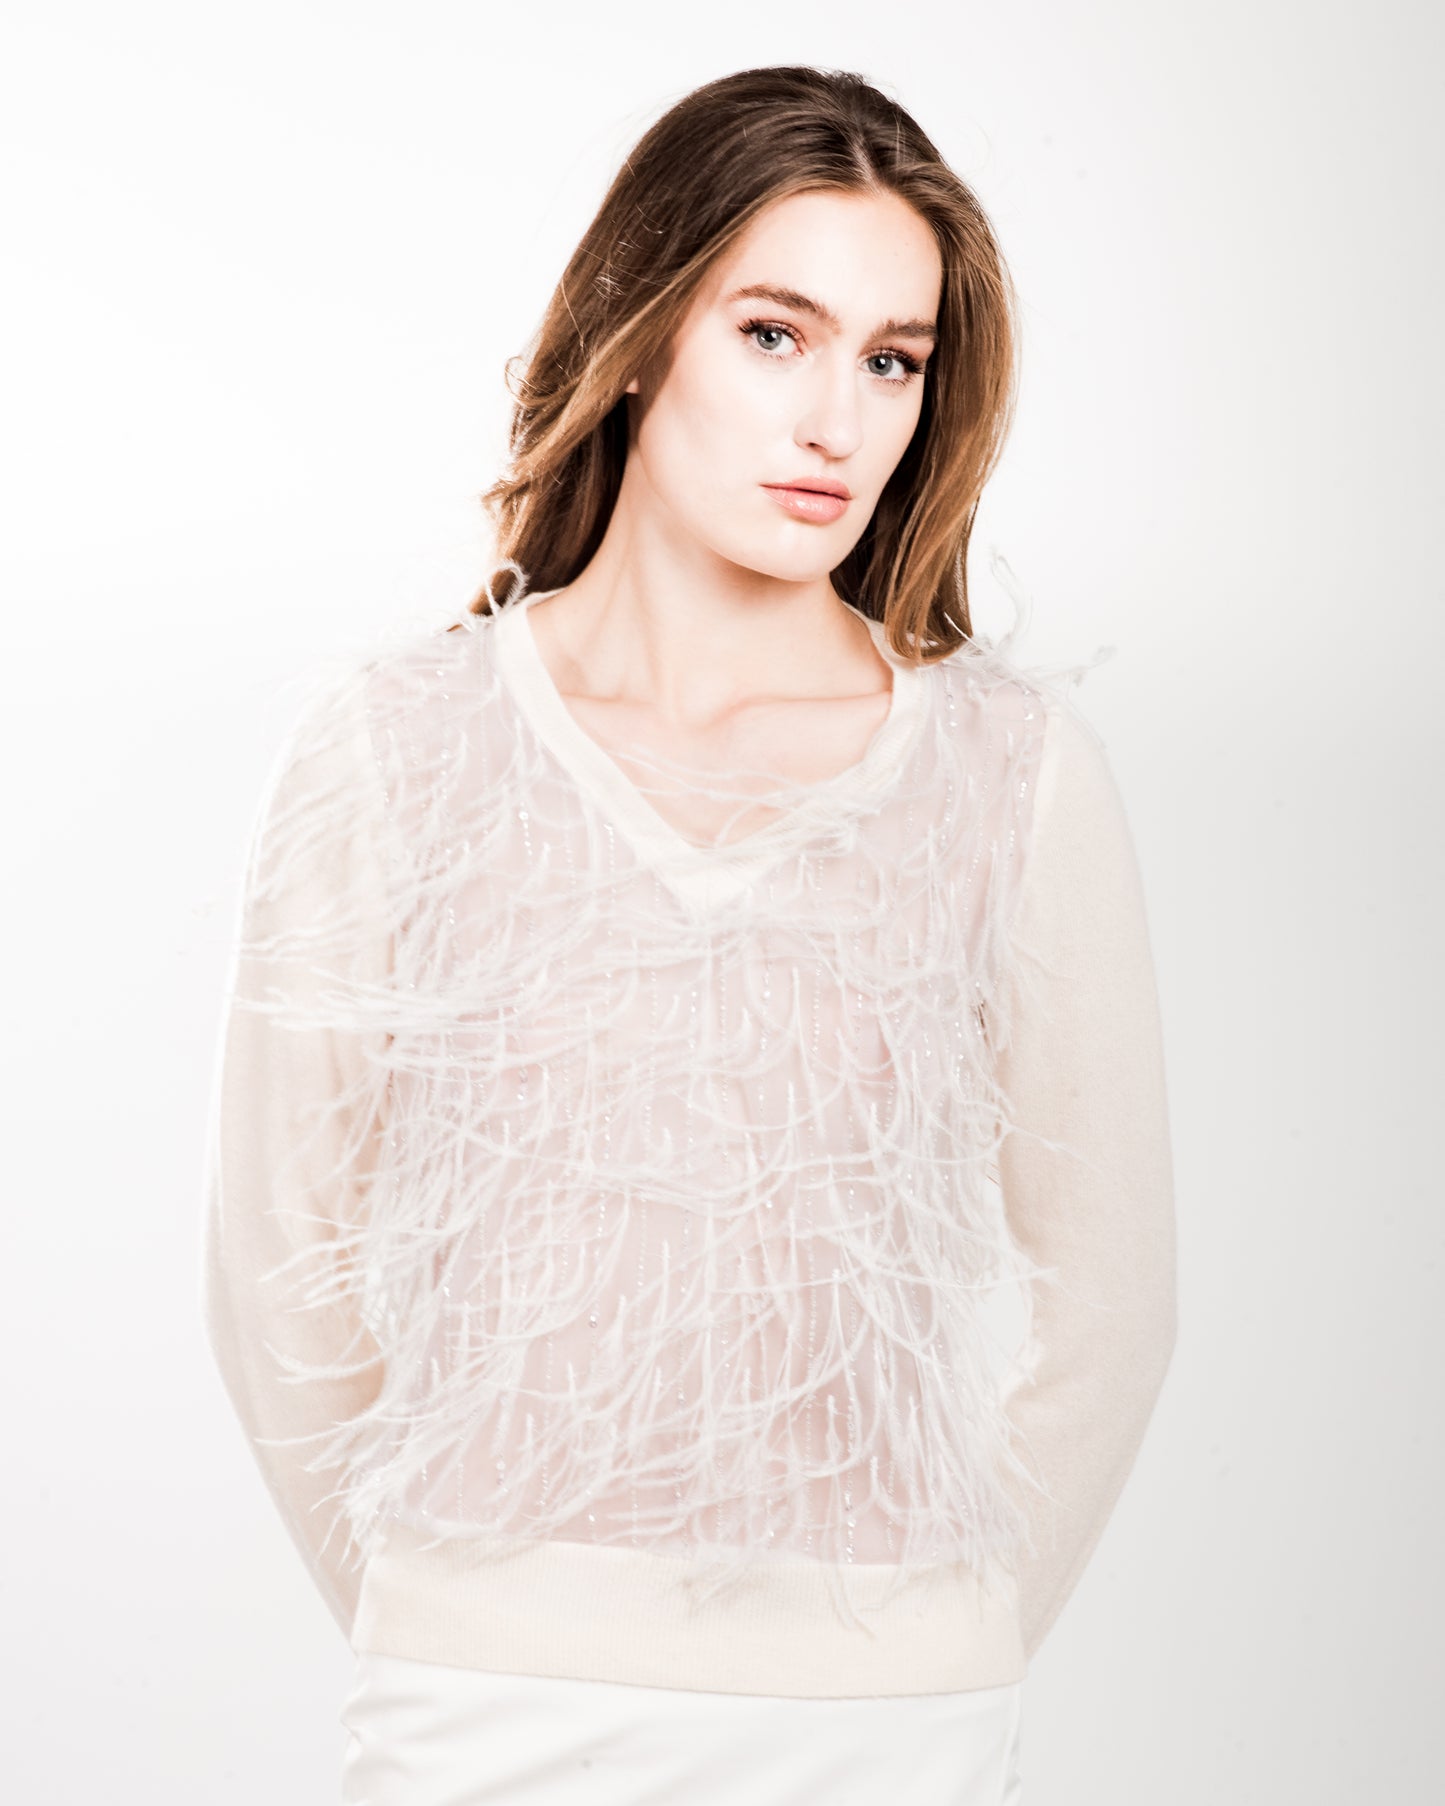 SMALL IVORY V-NECK LONG SLEEVE CASHMERE SWEATER WITH WHITE FEATHER AND CRYSTAL BEAD FRONT LINED WITH WHITE SILK ORGANZA